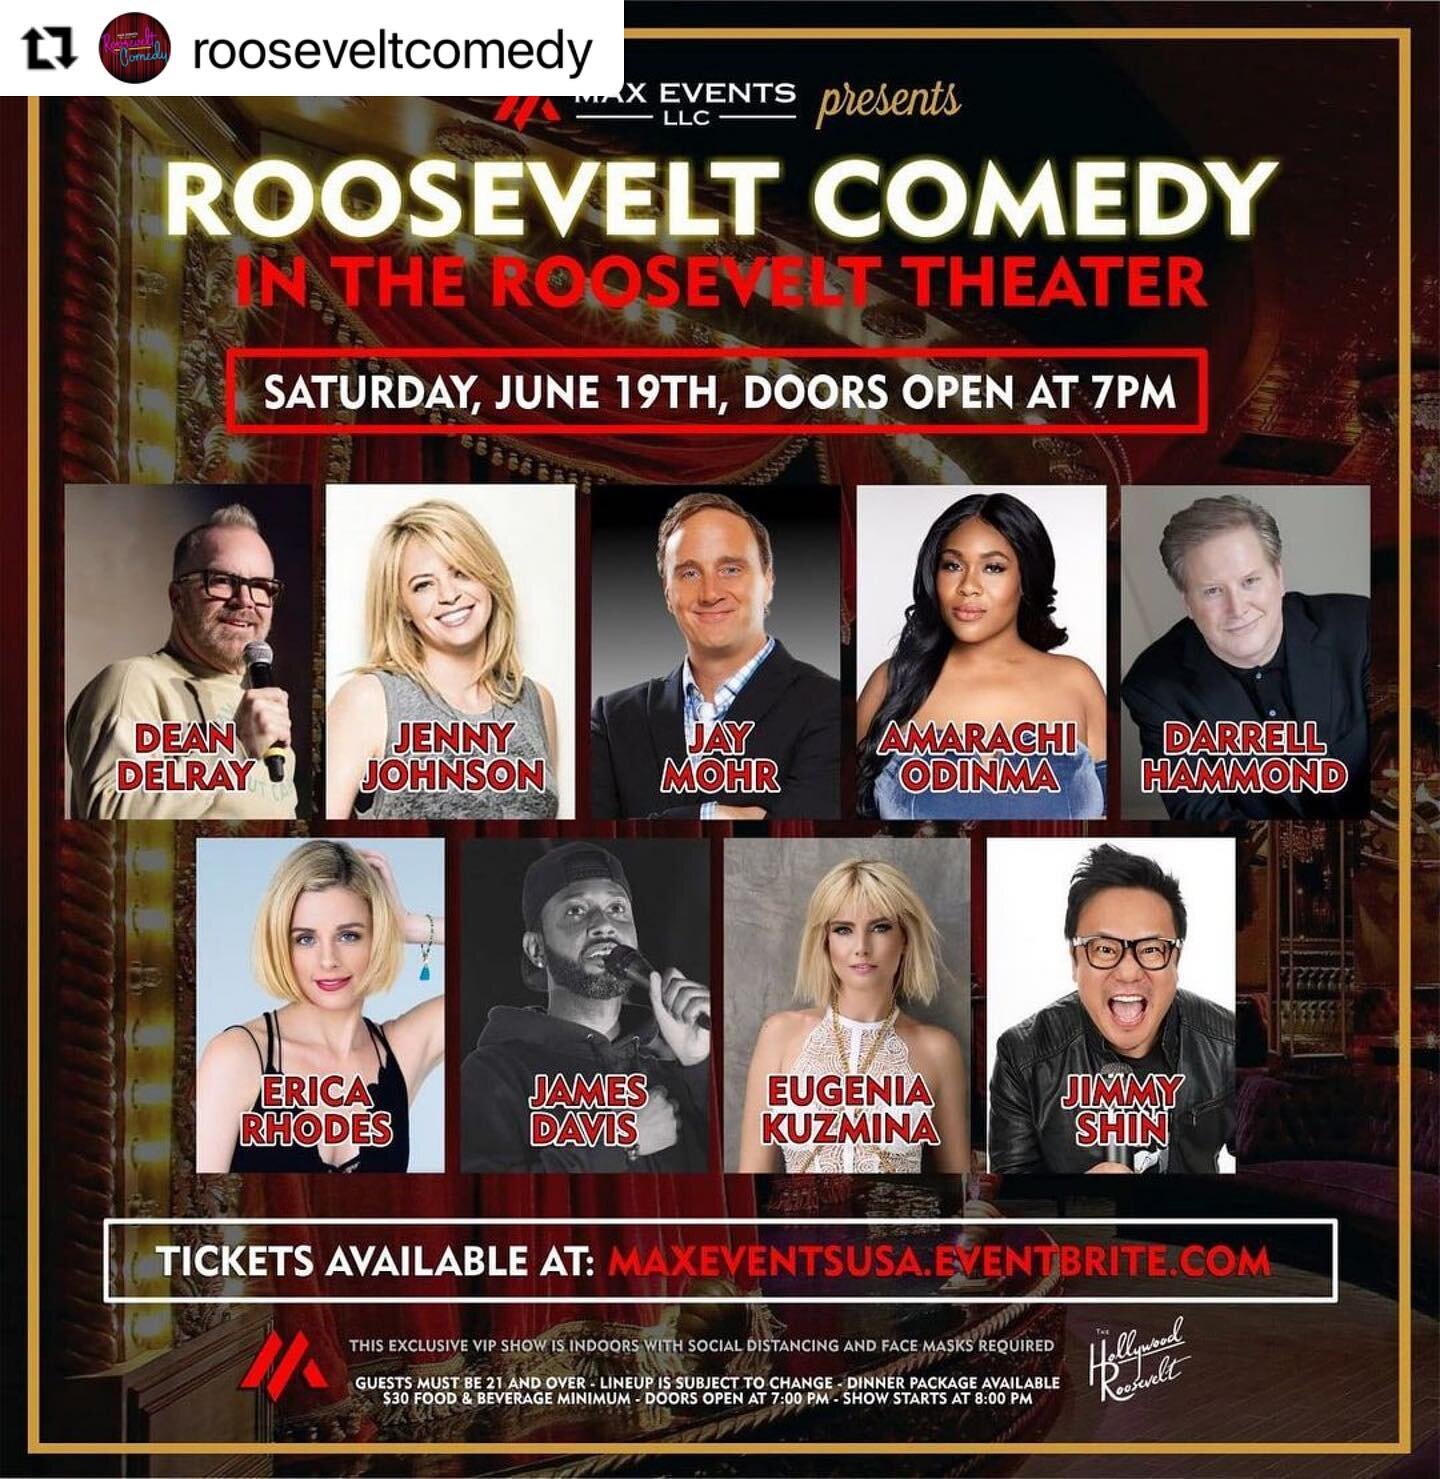 🔥Tomorrow Night ! ✨🌟😂✨ hosted by muah 💋! 🚗 🆙 🔥🔥
#Repost @rooseveltcomedy 
・・
OMG!! @rooseveltcomedy is back in the original comedy showcase theater inside The Hollywood Roosevelt Hotel!
Hosted by: AMARACHI ODINMA 
Performances: @deandelray , 